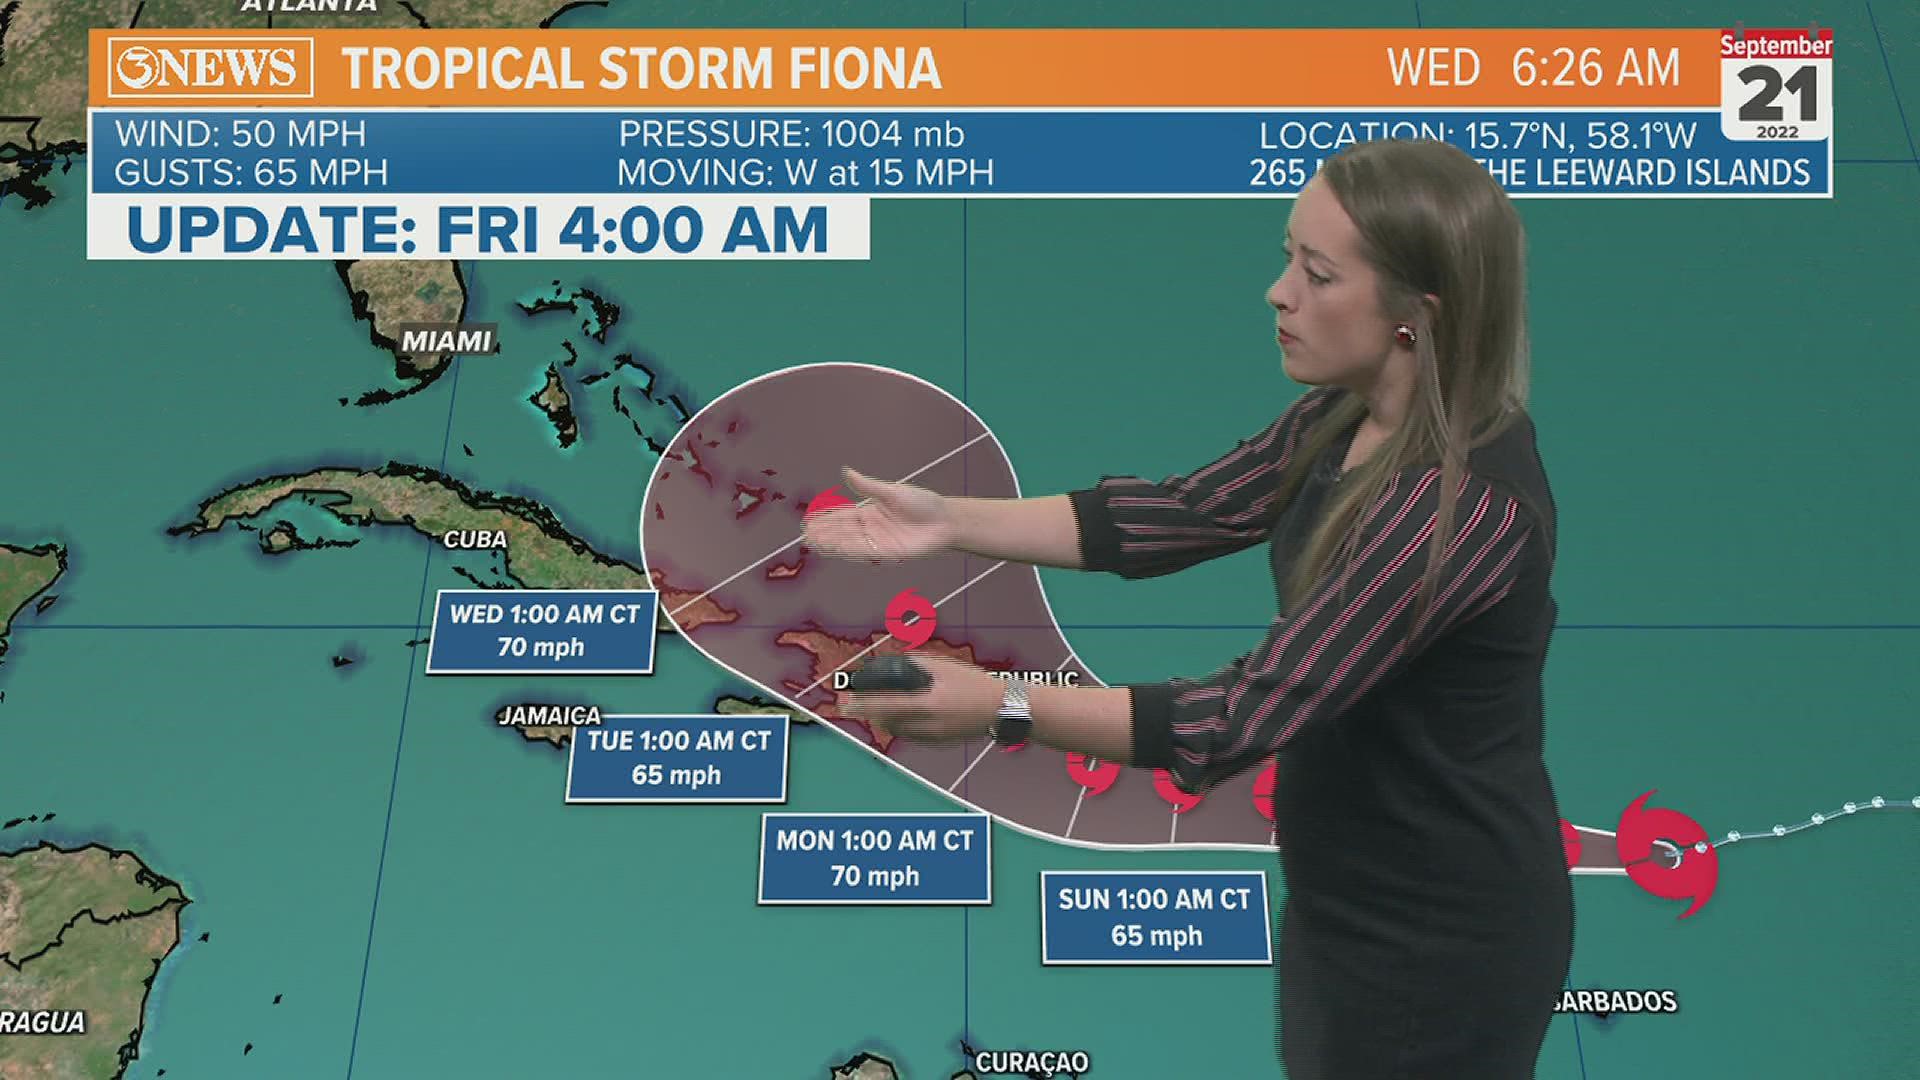 Tropical Storm Fiona is expected to maintain tropical storm strength across the Caribbean Islands. A turn north is still expected. Something to watch for Texas.